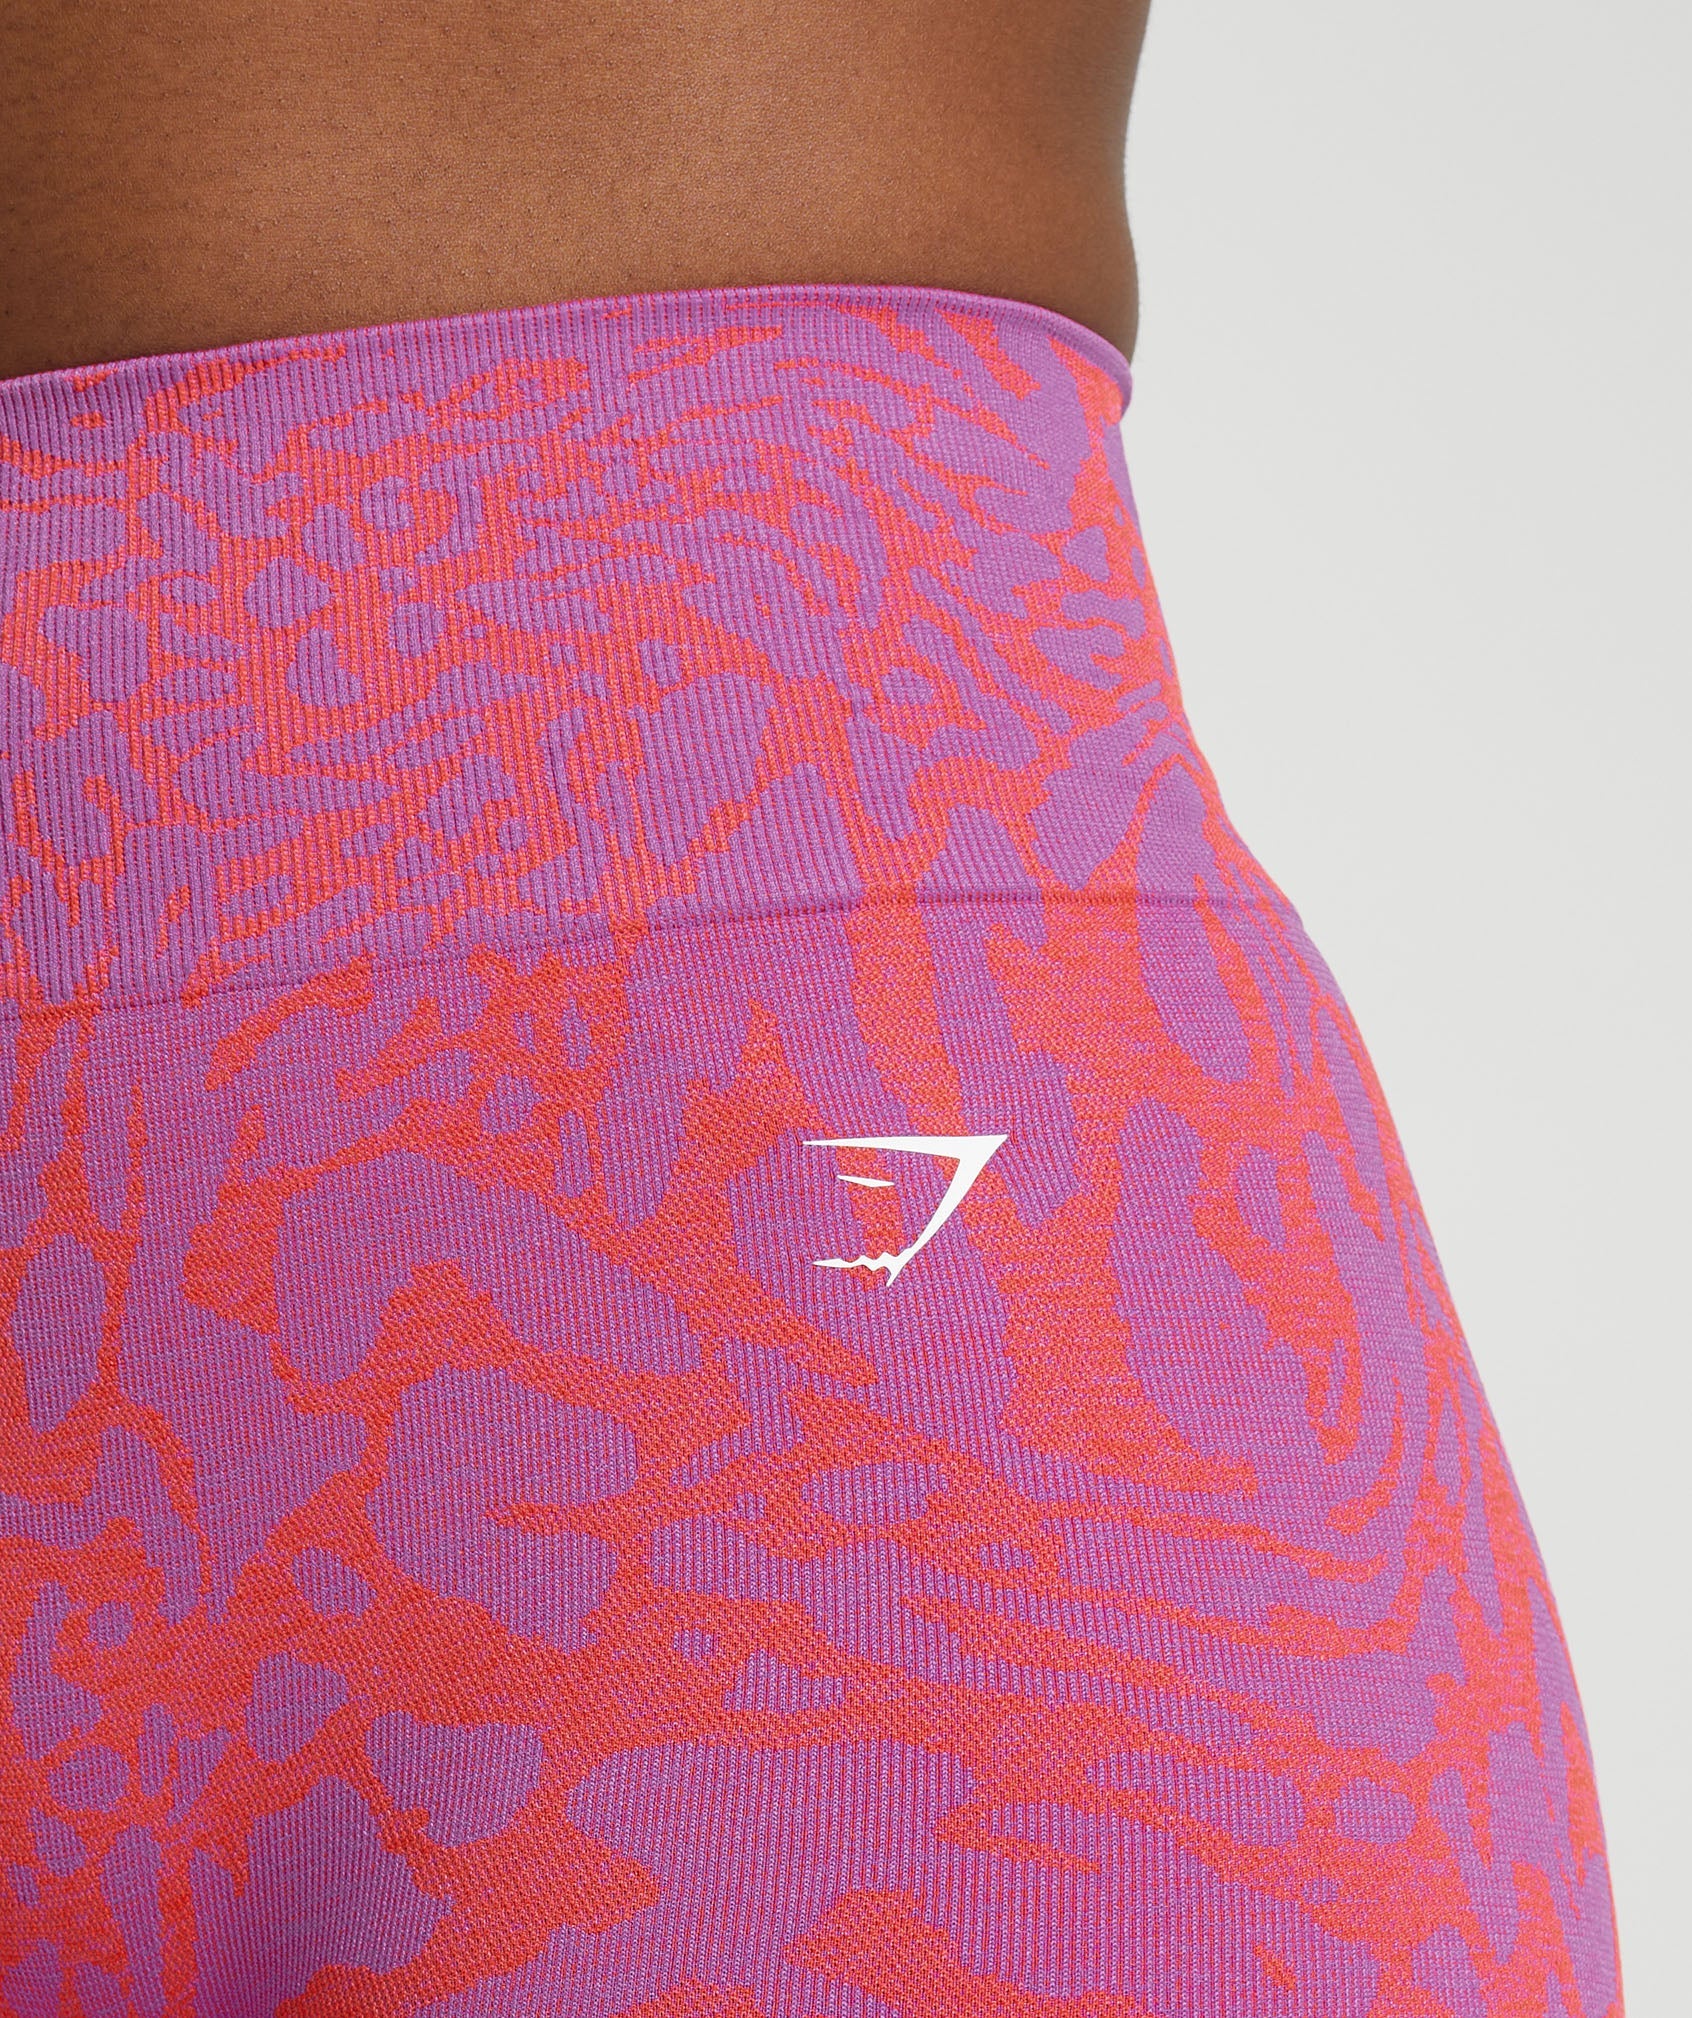 Adapt Safari Tight Shorts in Shelly Pink/Fly Coral - view 6